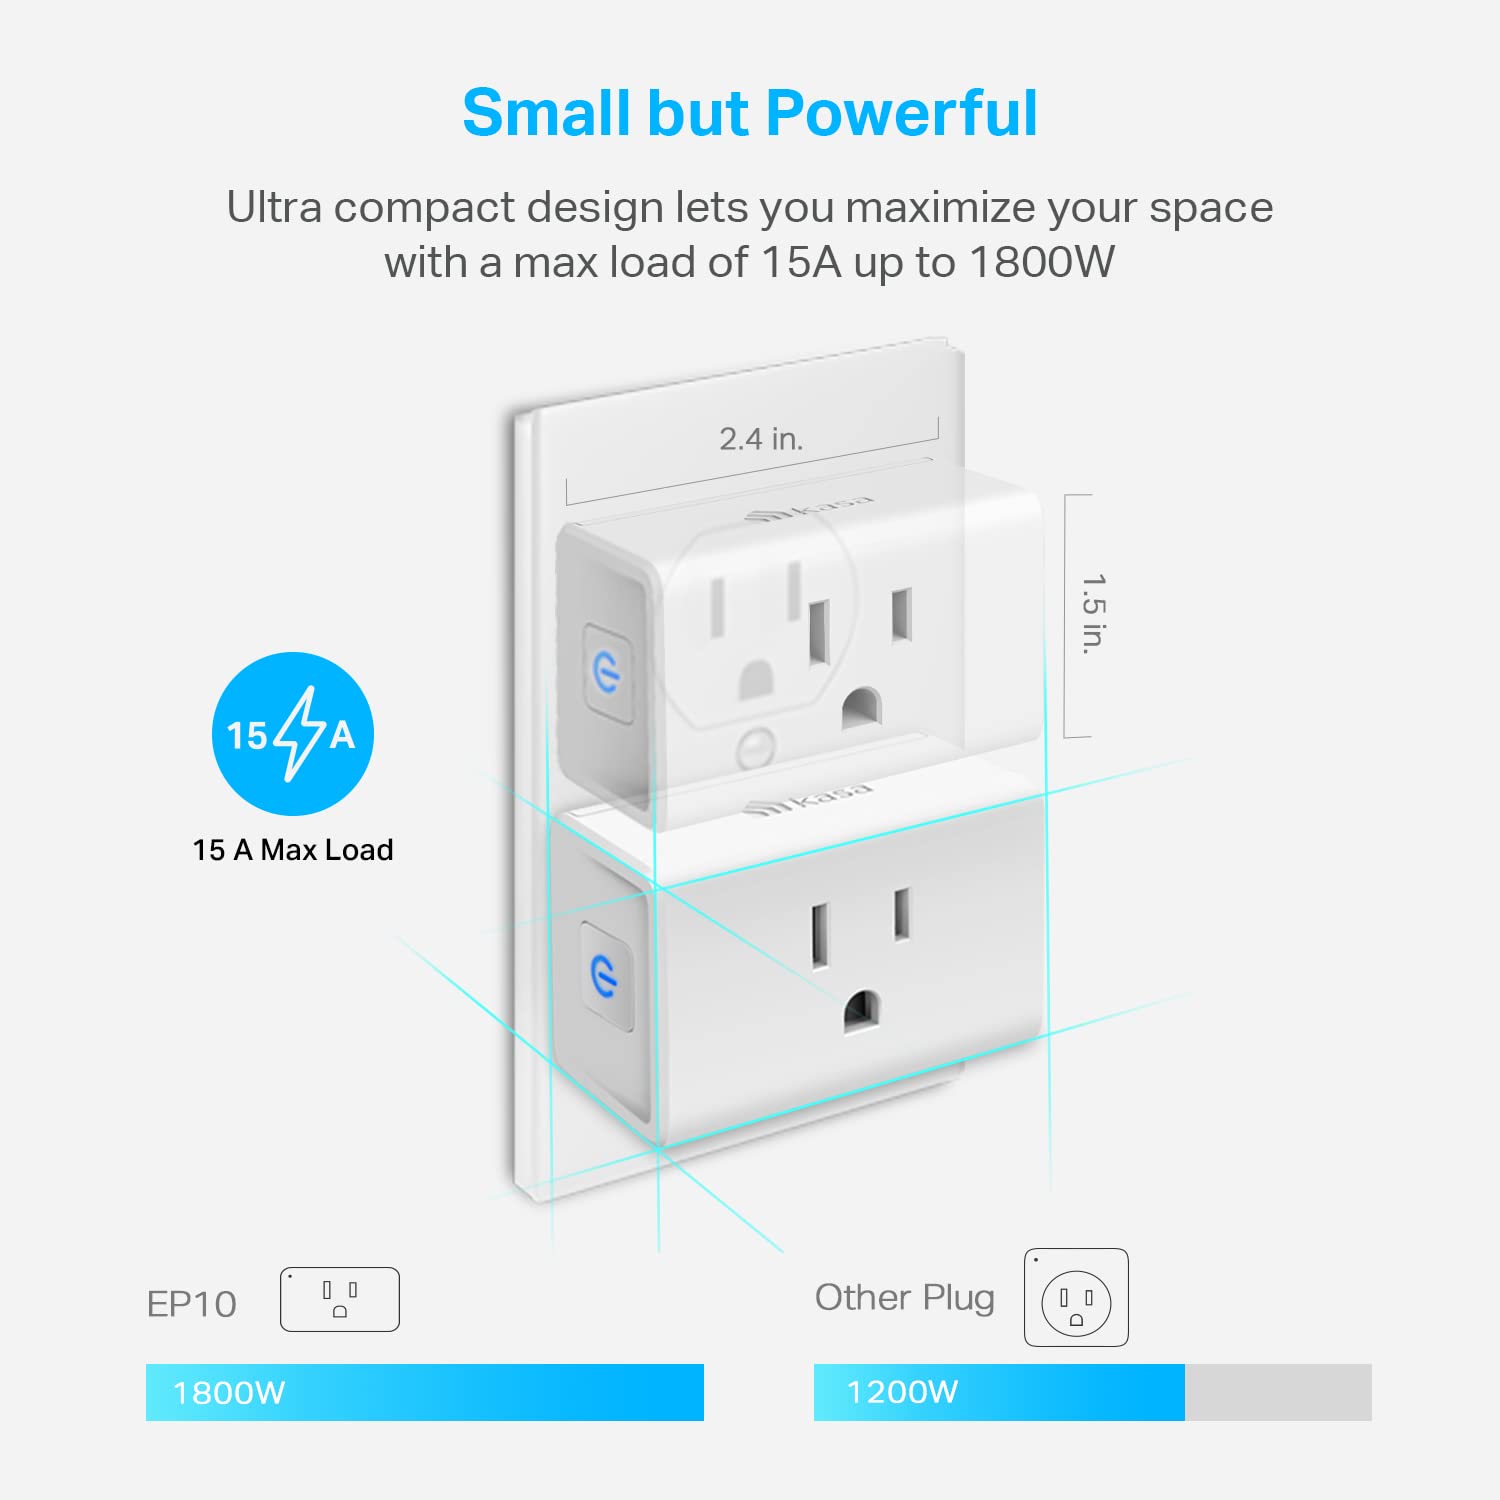 Kasa Smart Plug Ultra Mini 15A, Smart Home Wi-Fi Outlet Works with Alexa, Google Home & IFTTT, No Hub Required, UL Certified, 2.4G WiFi Only, 1-Pack(EP10), White